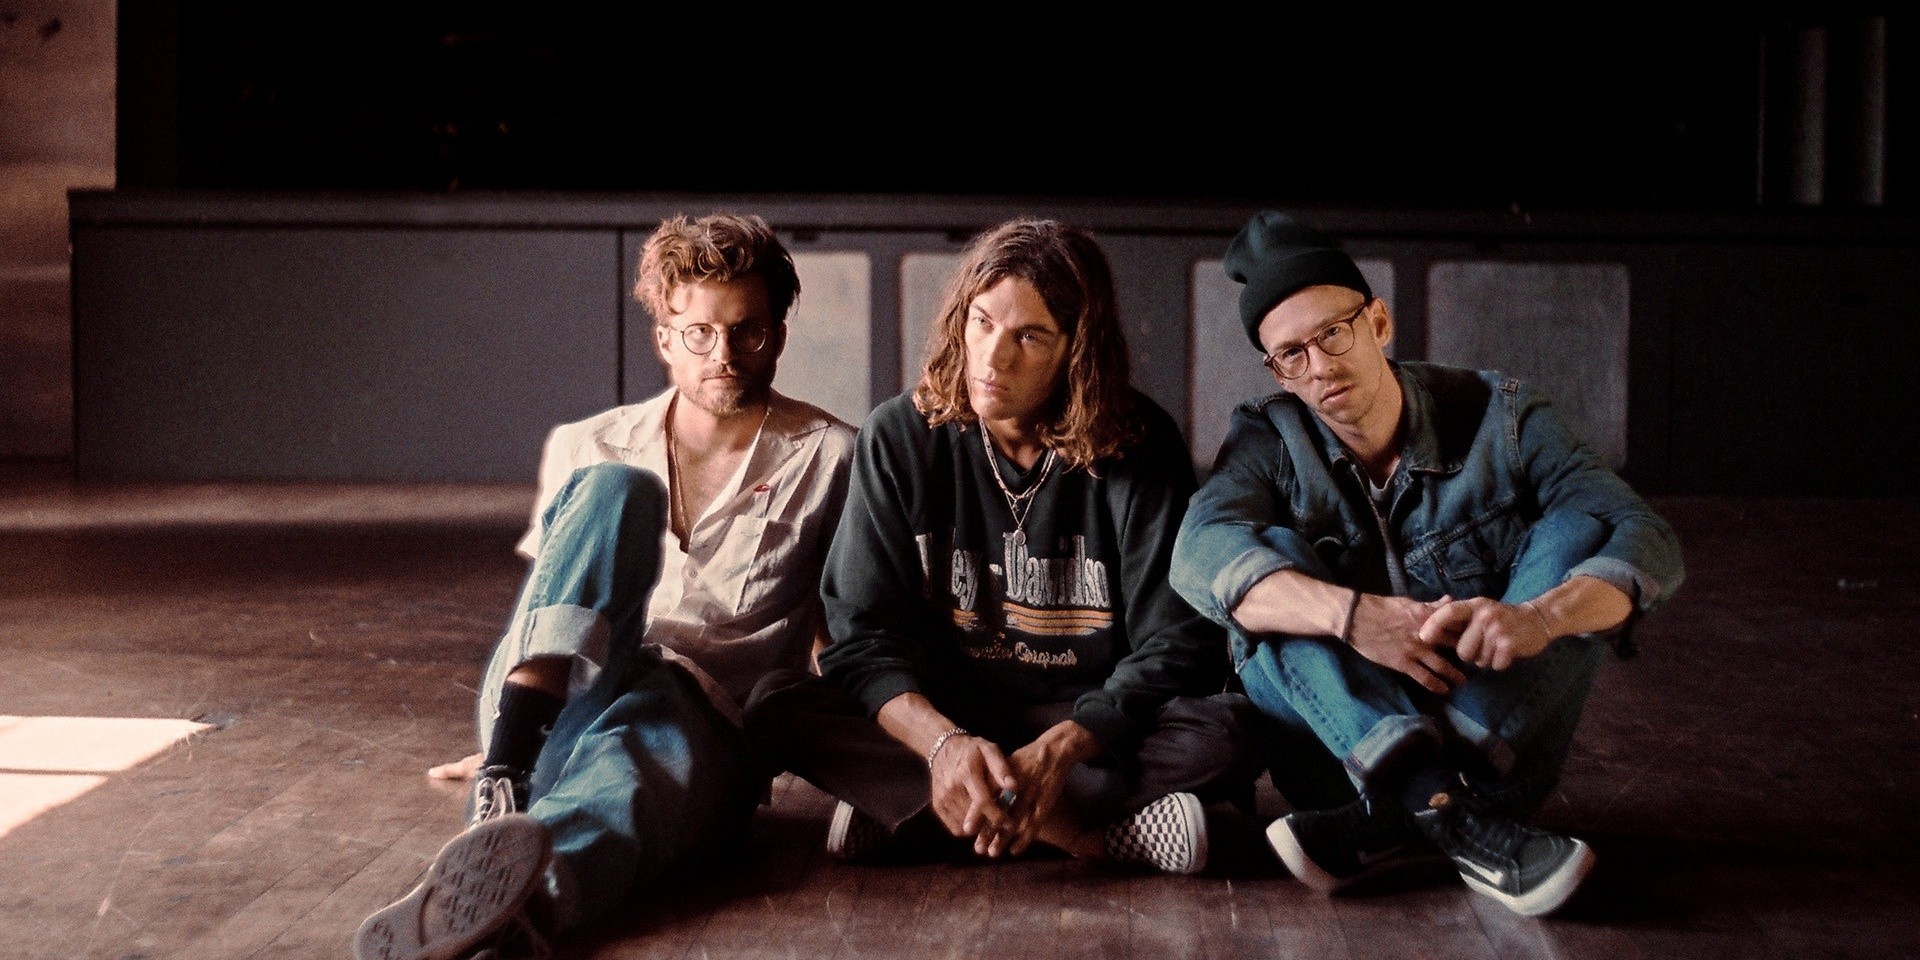 Get a chance to meet-and-greet LANY – contest 